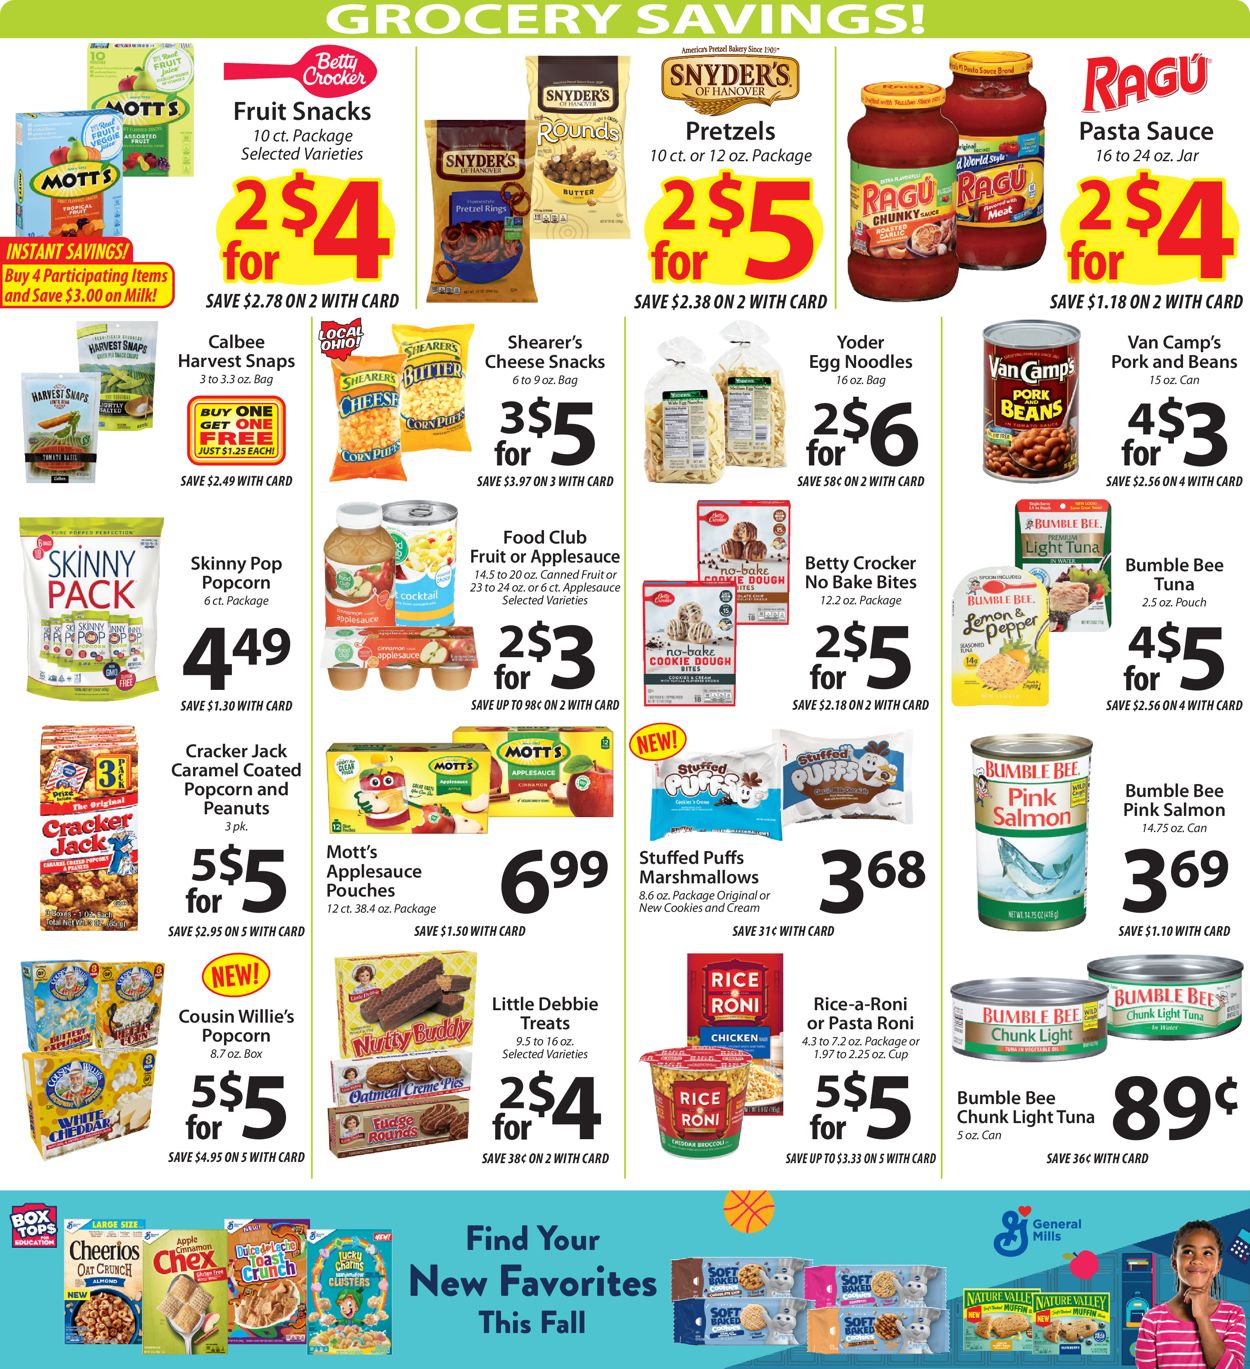 Acme Fresh Market Ad from 08/19/2021